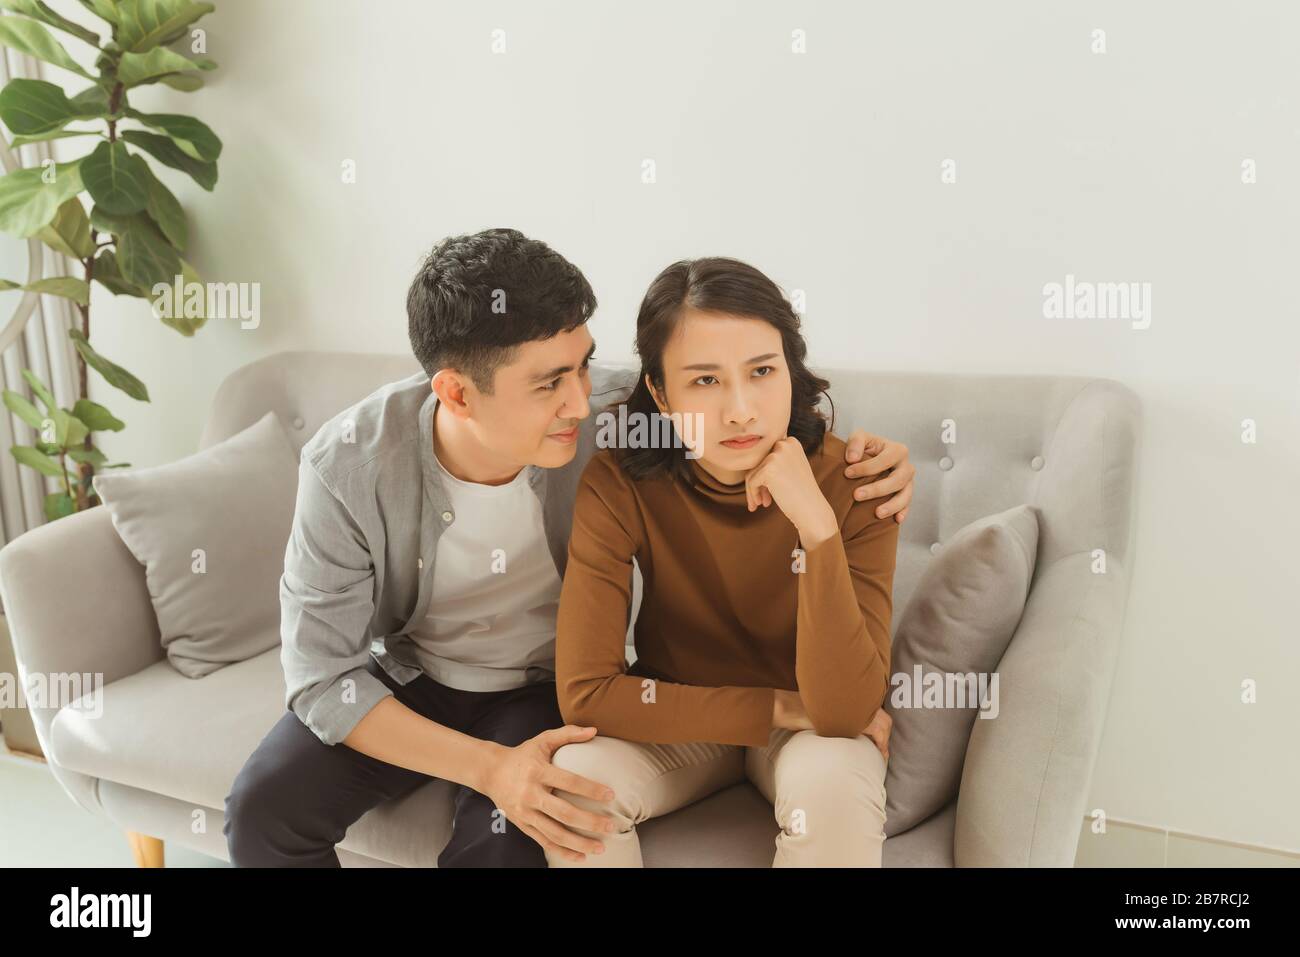 Young asian couple quarreling at home, woman offended. Family relationship difficulties concept, copy space Stock Photo